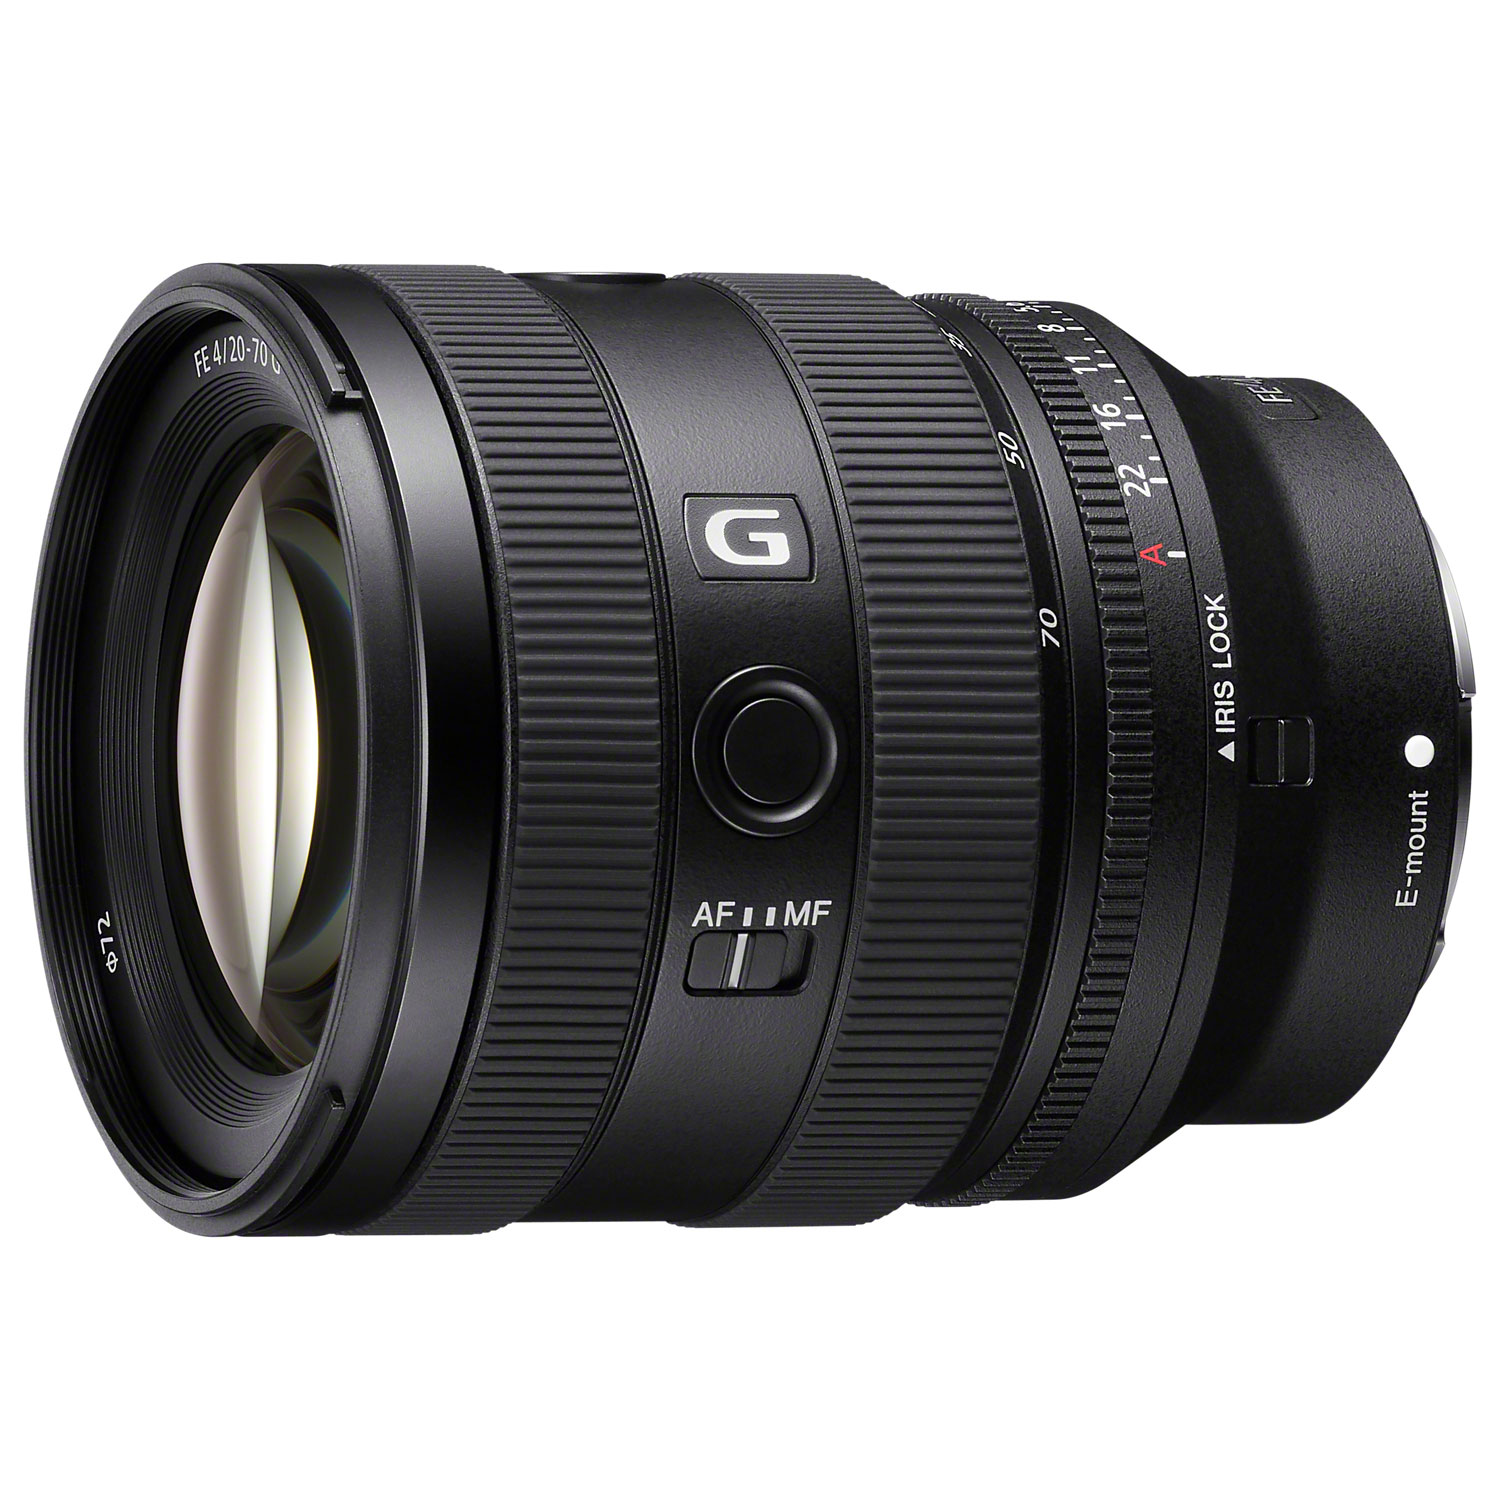 Sony E-Mount Full-Frame 20-70mm f/4 G Ultra-Wide Compact Lightweight Zoom Lens